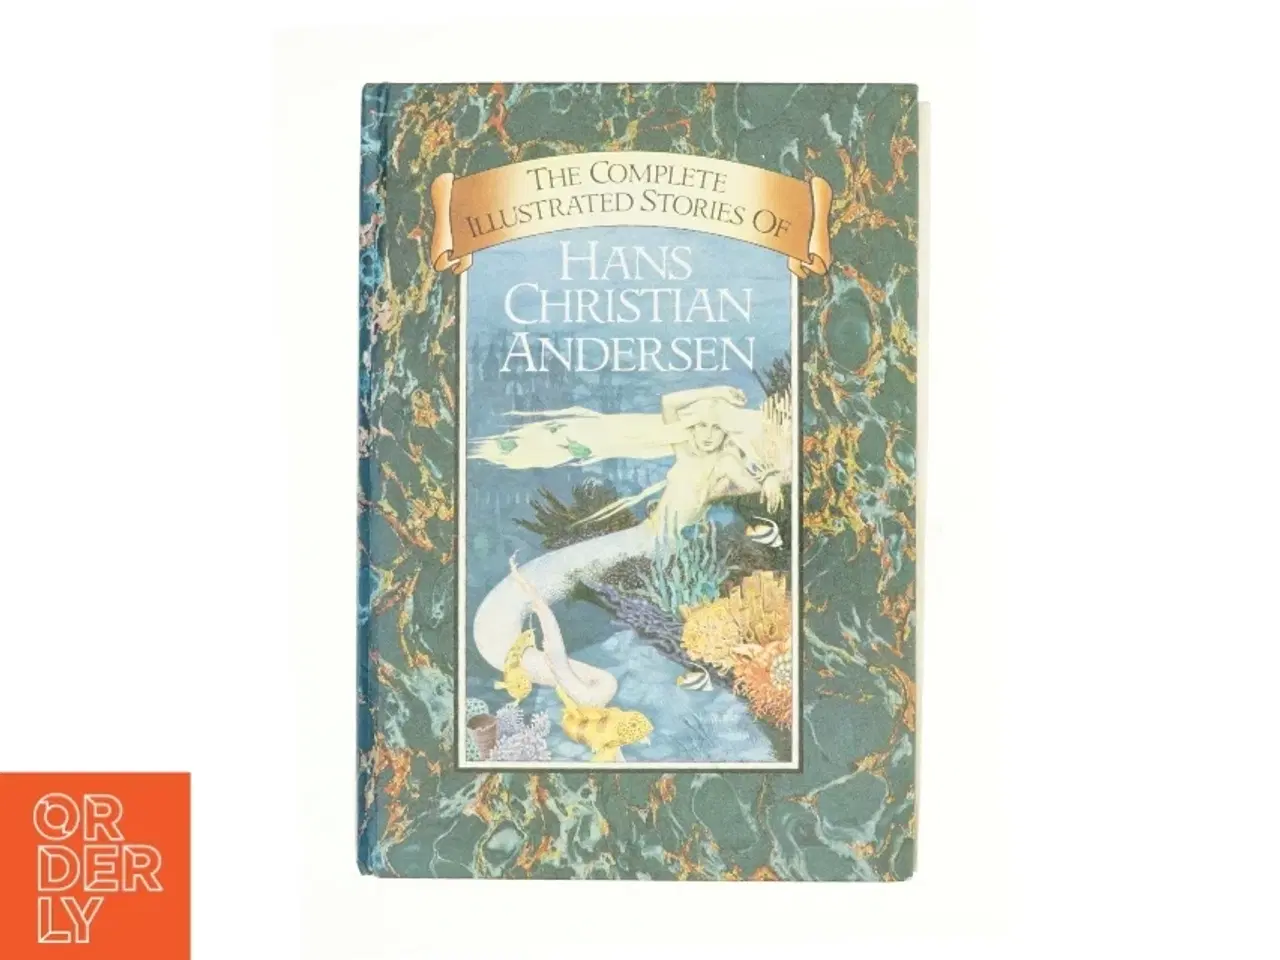 Billede 1 - The Complete Illustrated Stories of Hans Christian Andersen af Hans Christian Andersen (Bog)